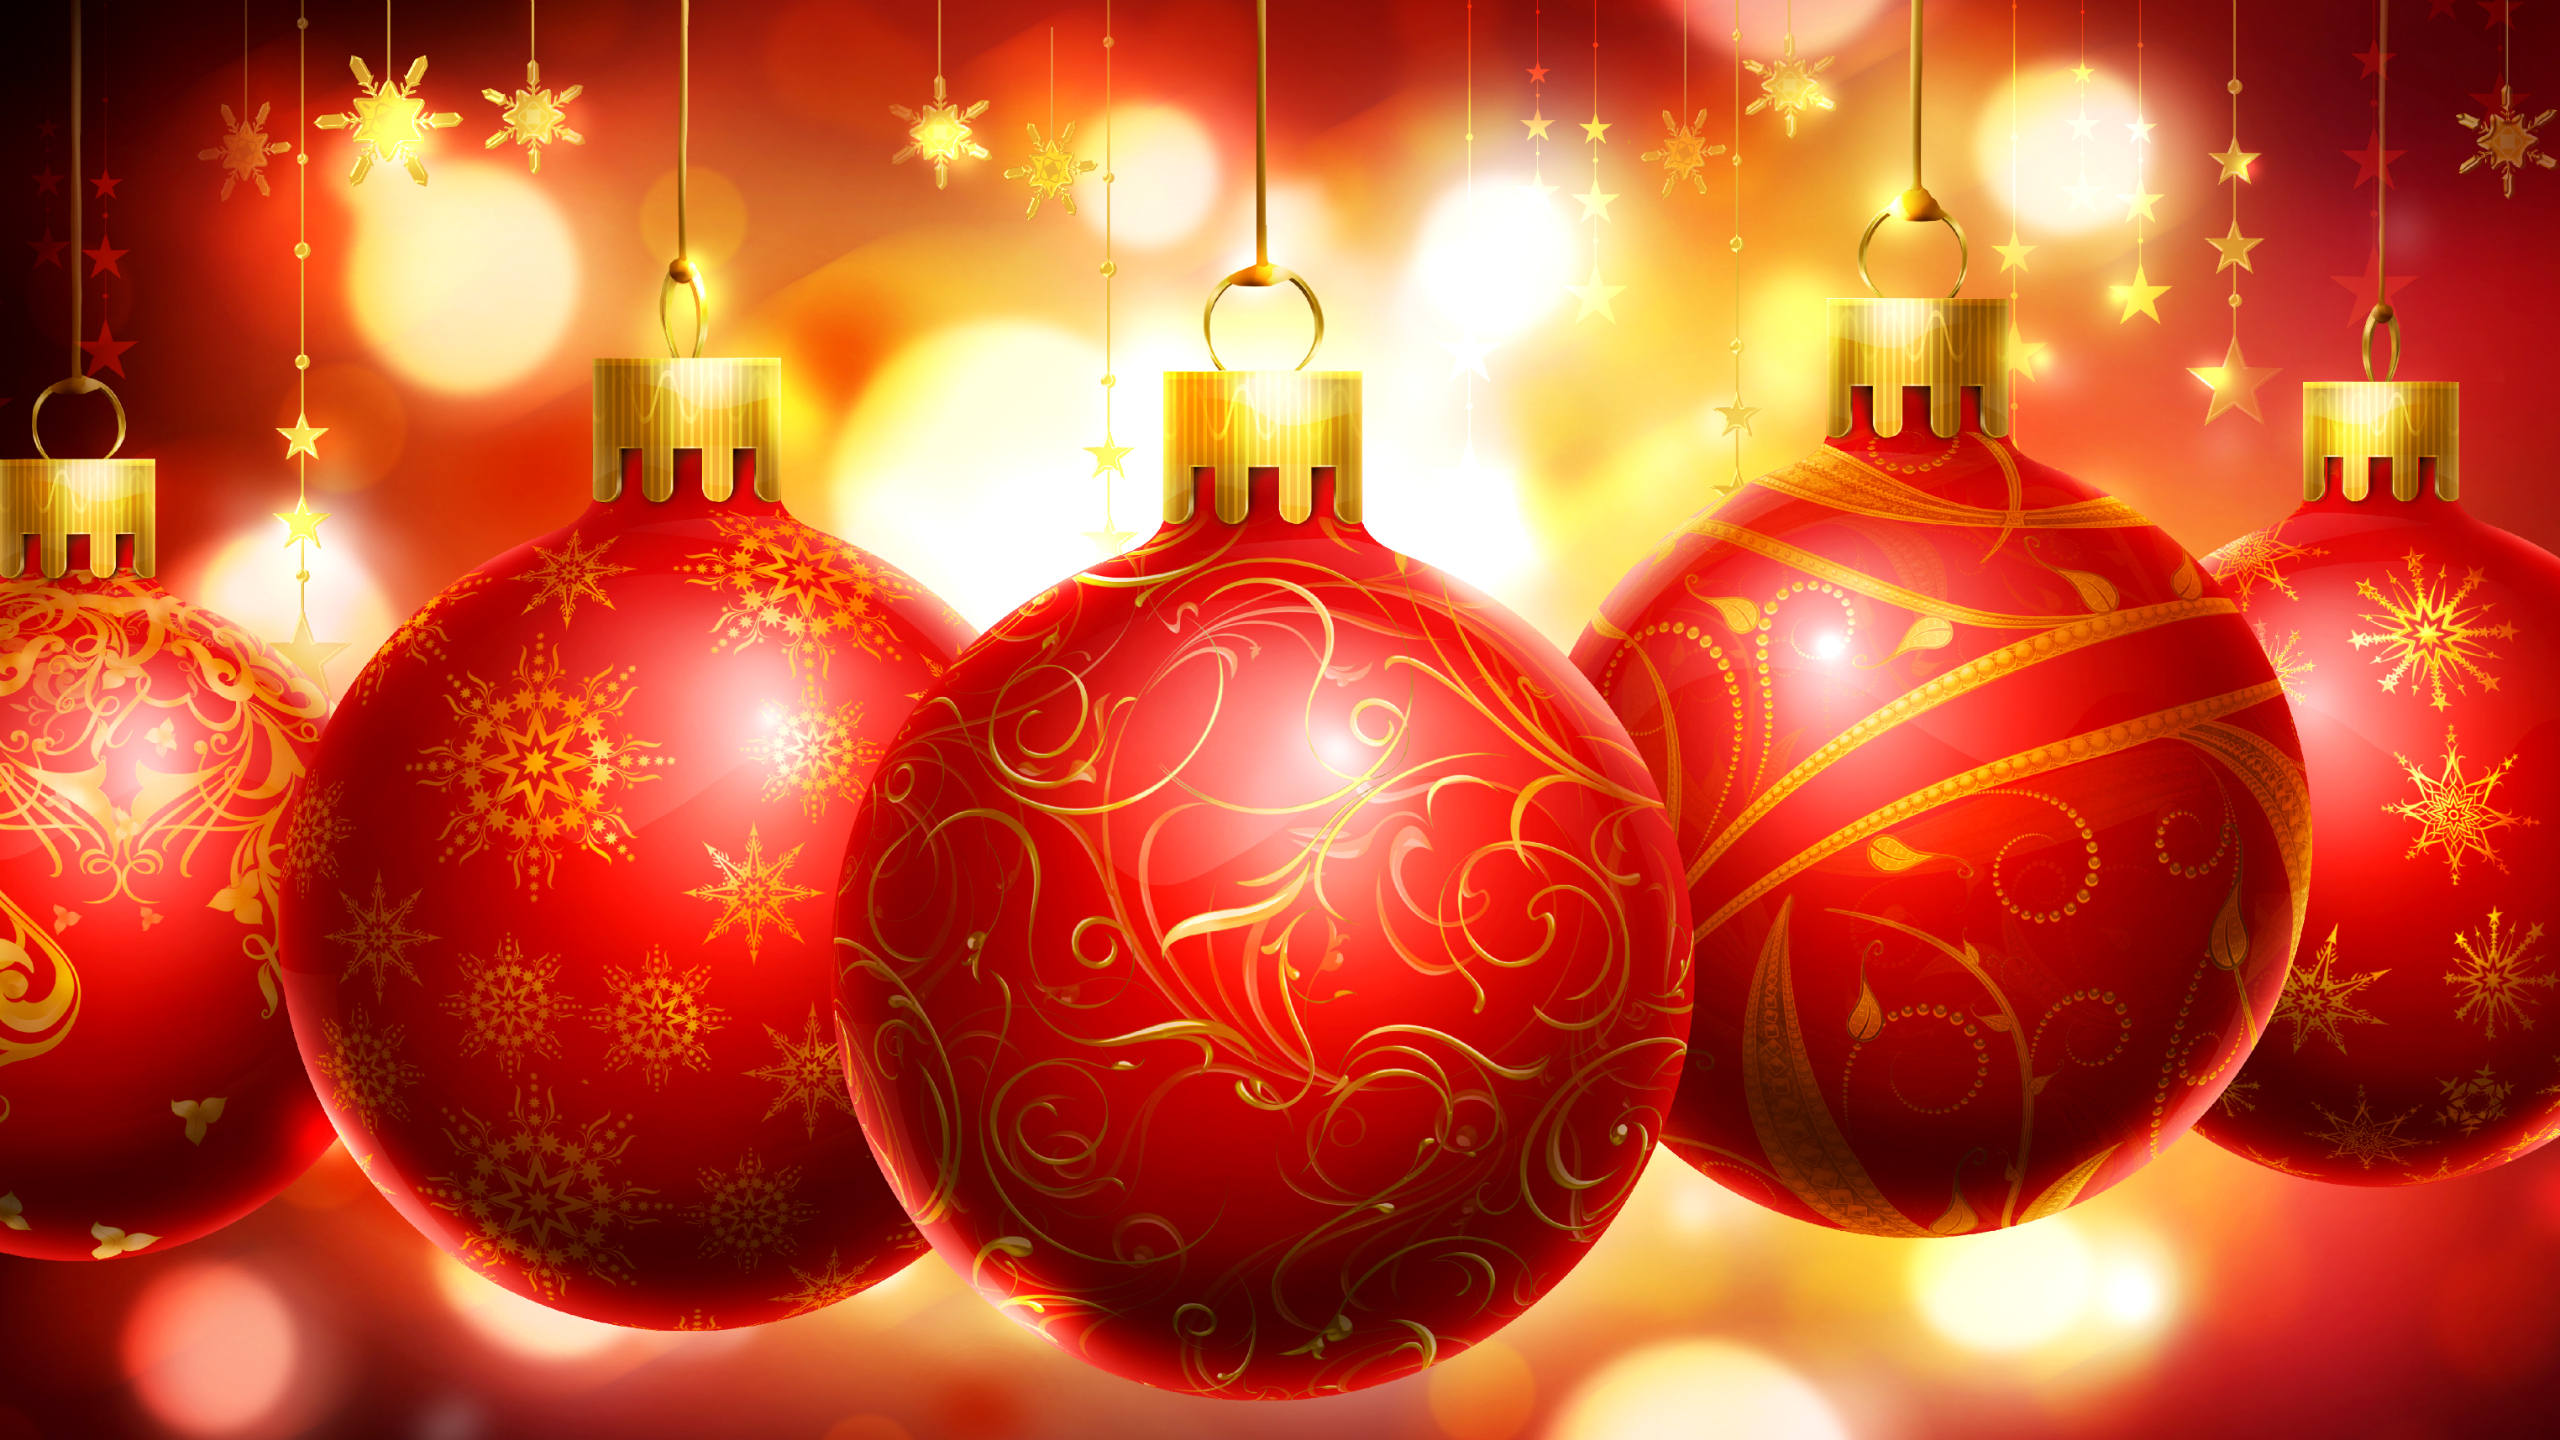 Merry Christmas Christmas Decorations Red Hd Wallpaper For Desktop 2560x1440 : 0